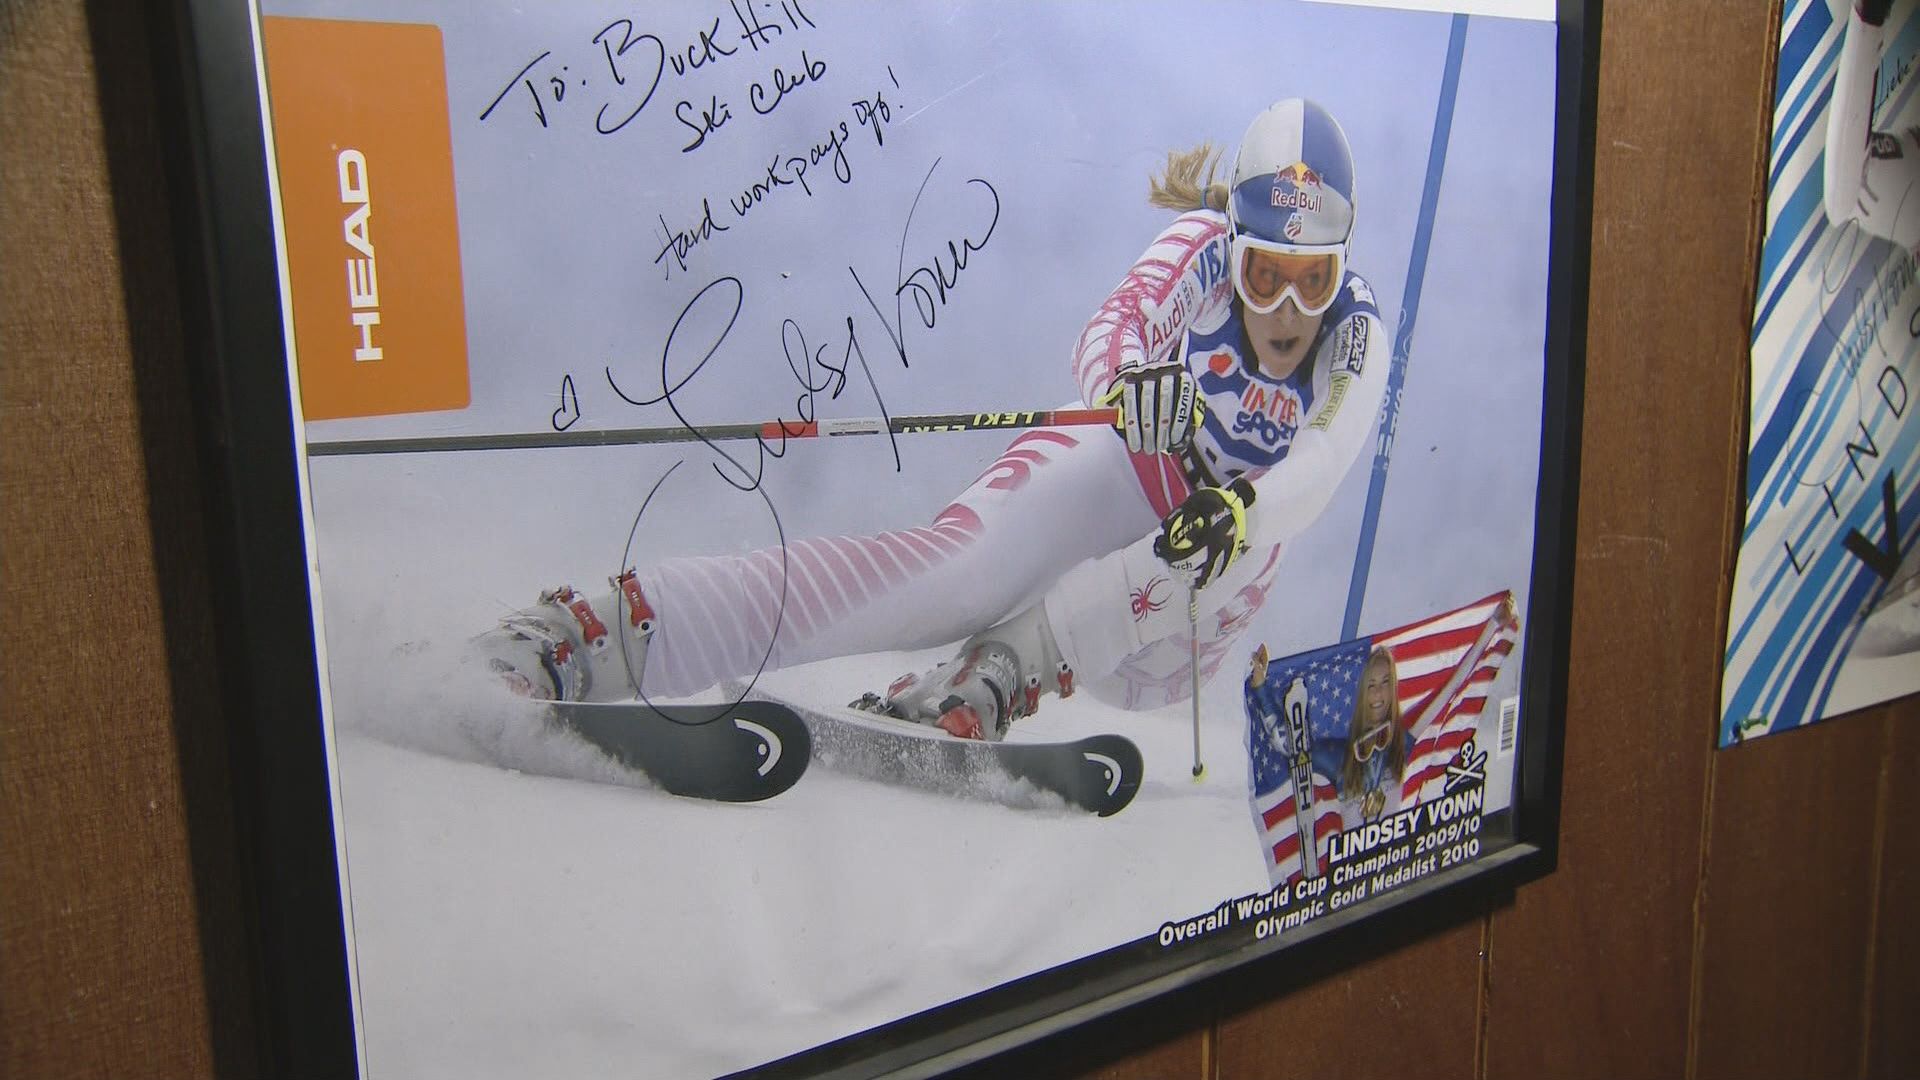 Lindsey Vonn's legacy lives on at Buck Hill